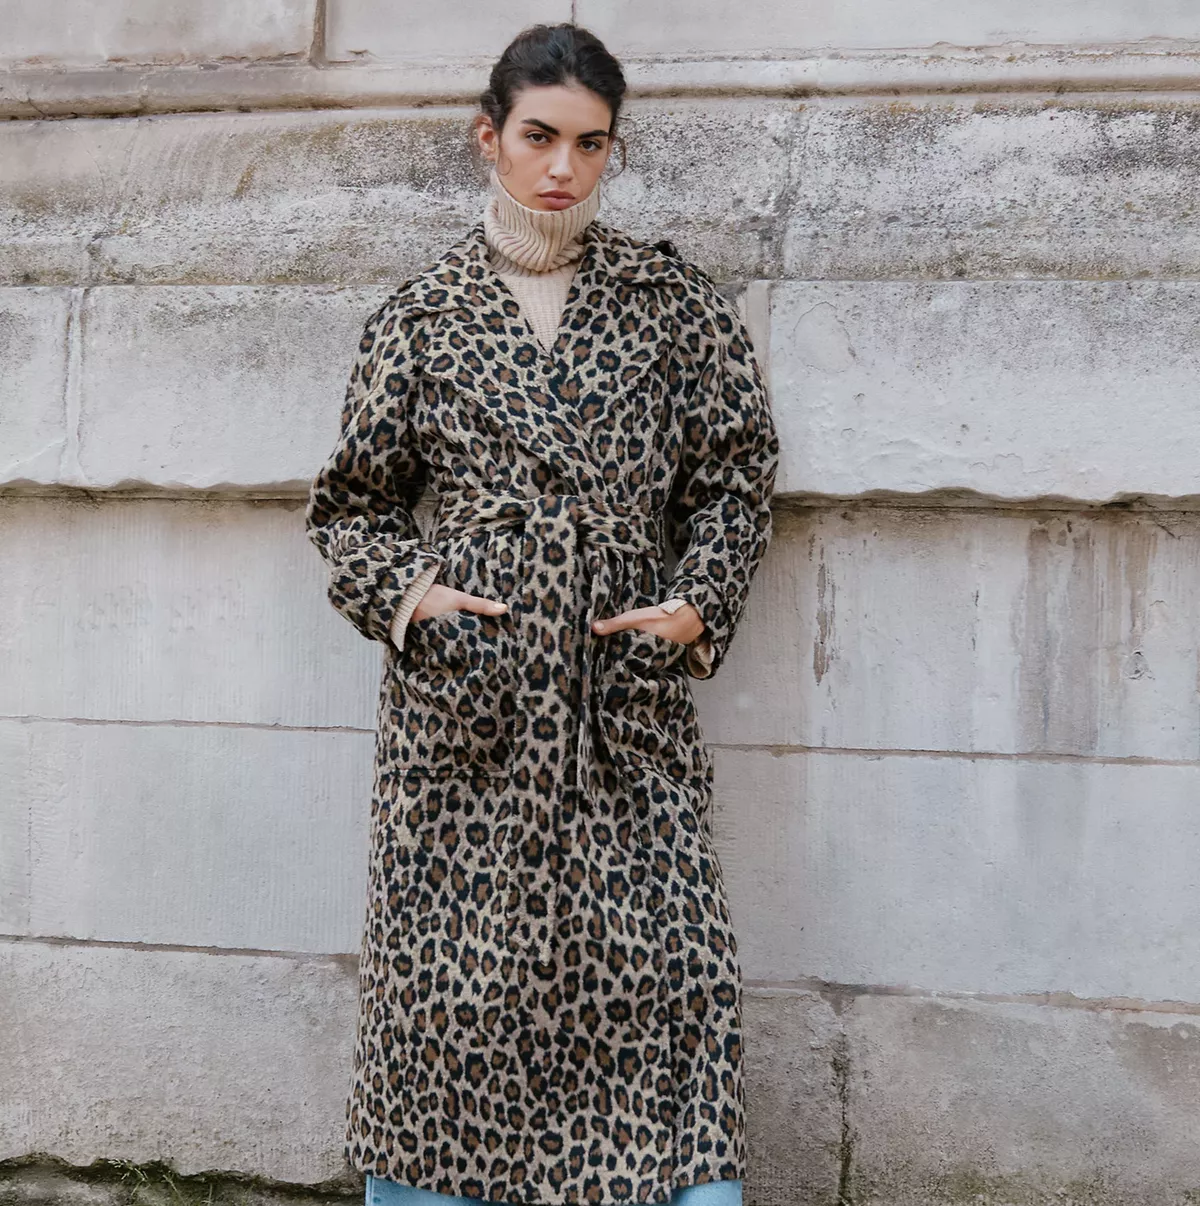 How to style leopard print